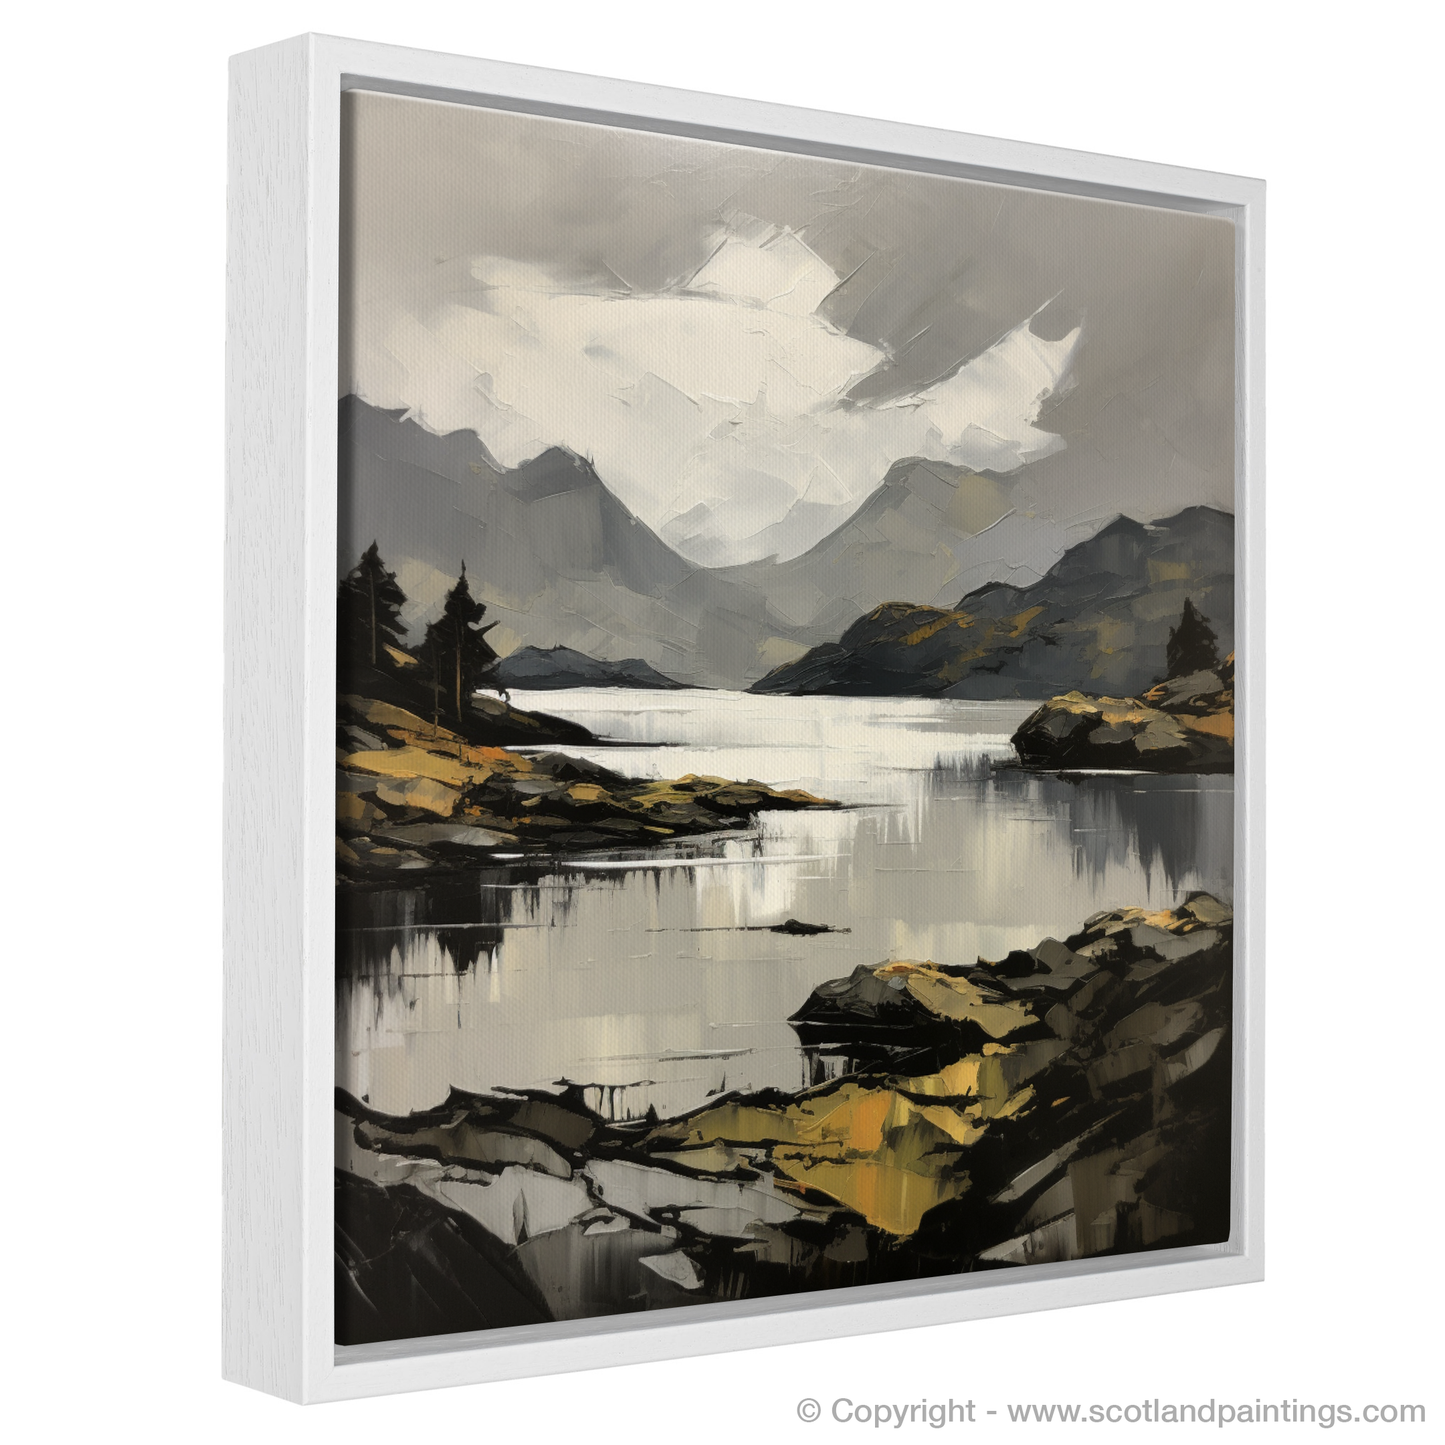 Painting and Art Print of Loch Morar, Highlands entitled "Highland Majesty: The Brooding Beauty of Loch Morar".